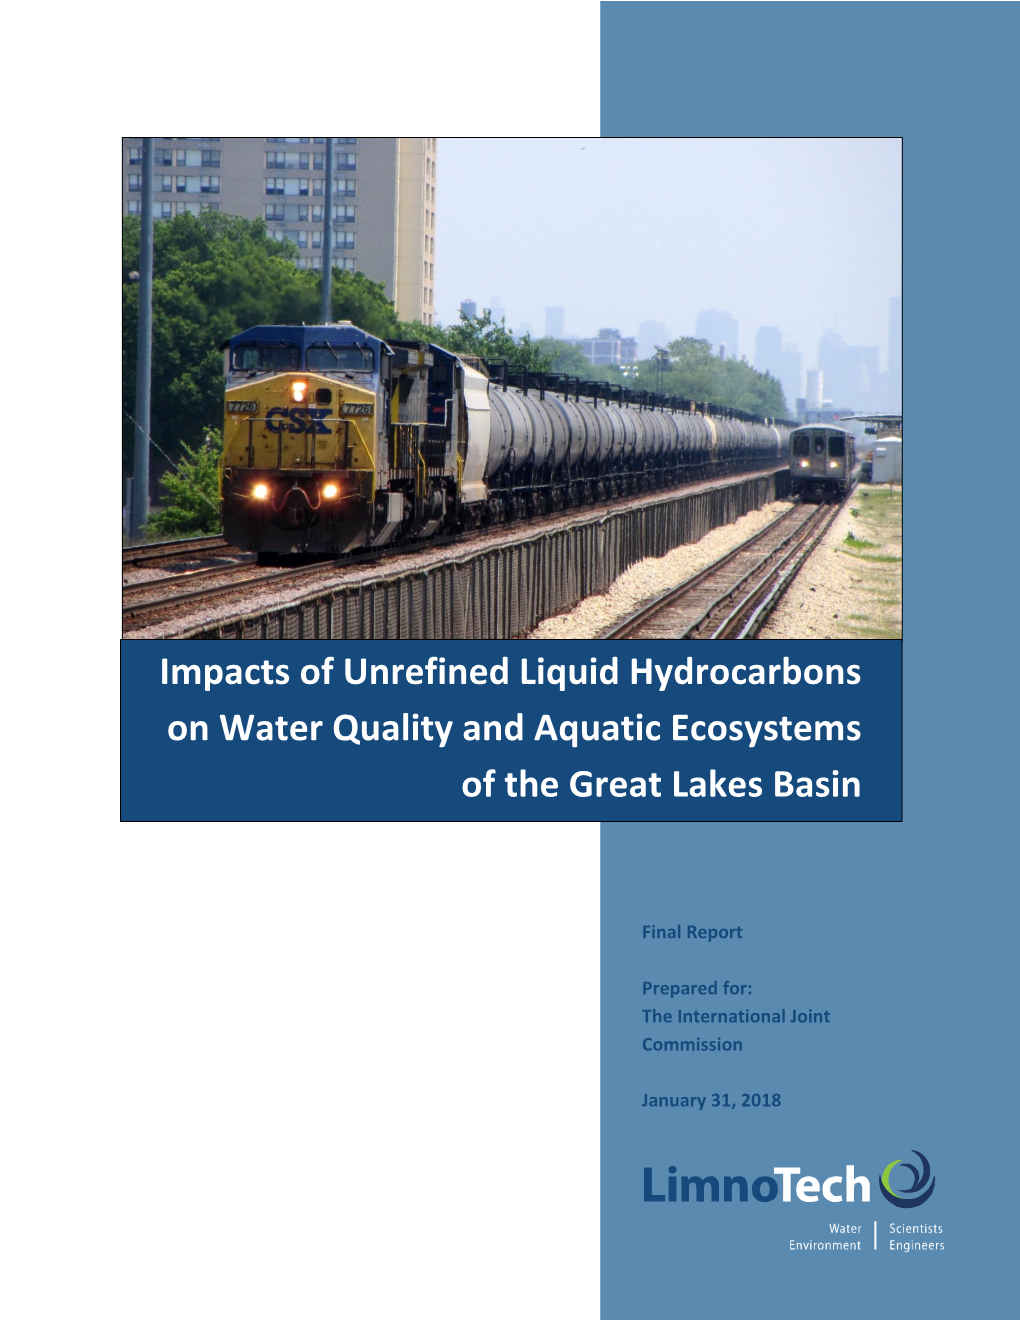 Impacts of Unrefined Liquid Hydrocarbons on Water Quality and Aquatic Ecosystems of the Great Lakes Basin